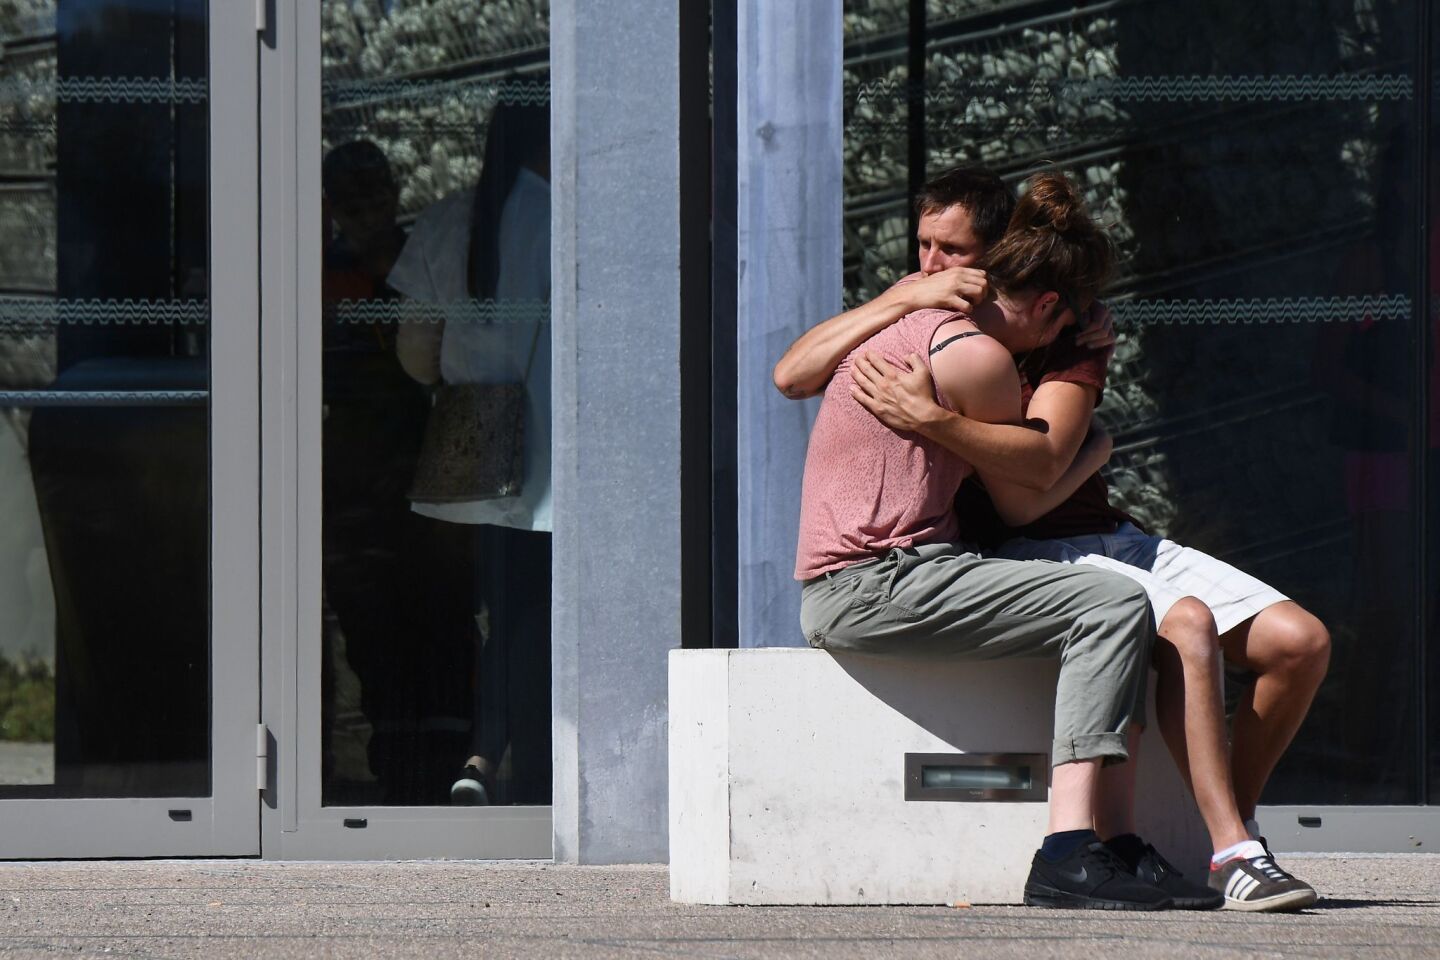 People hug outside Pasteur Hospital in Nice after the July 14 truck attack that killed 84 people.